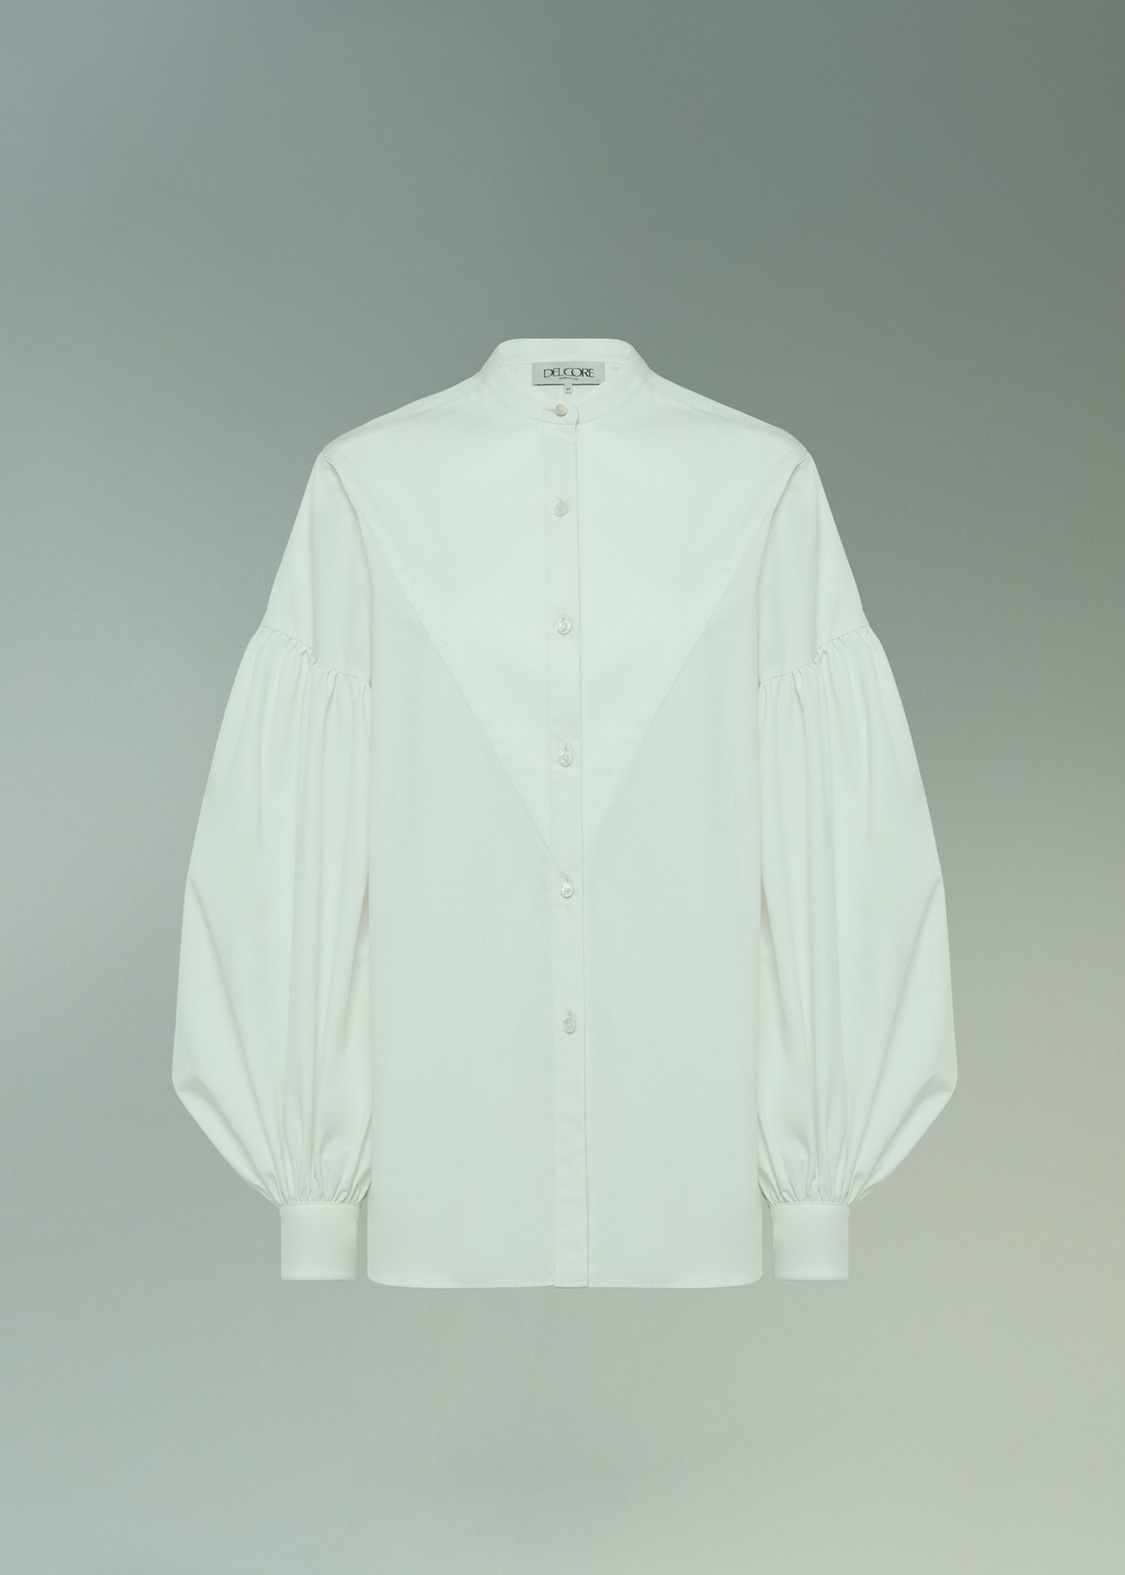 DEL CORE BALLOON SLEEVE SHIRT WITH TRIANGULAR PLASTRON IN PIQUE